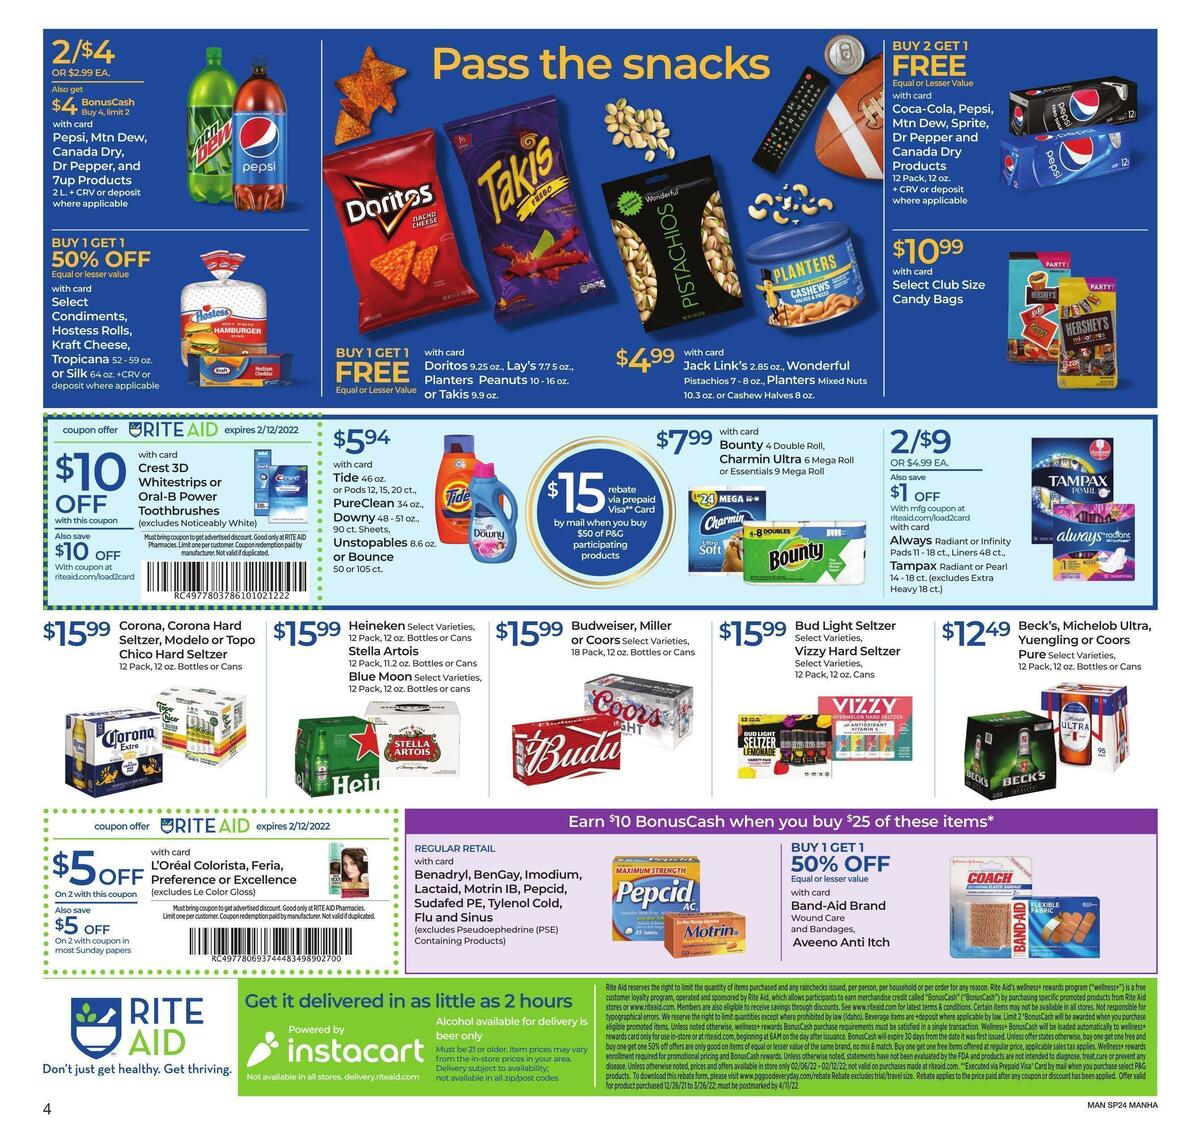 Rite Aid Weekly Ad from February 6